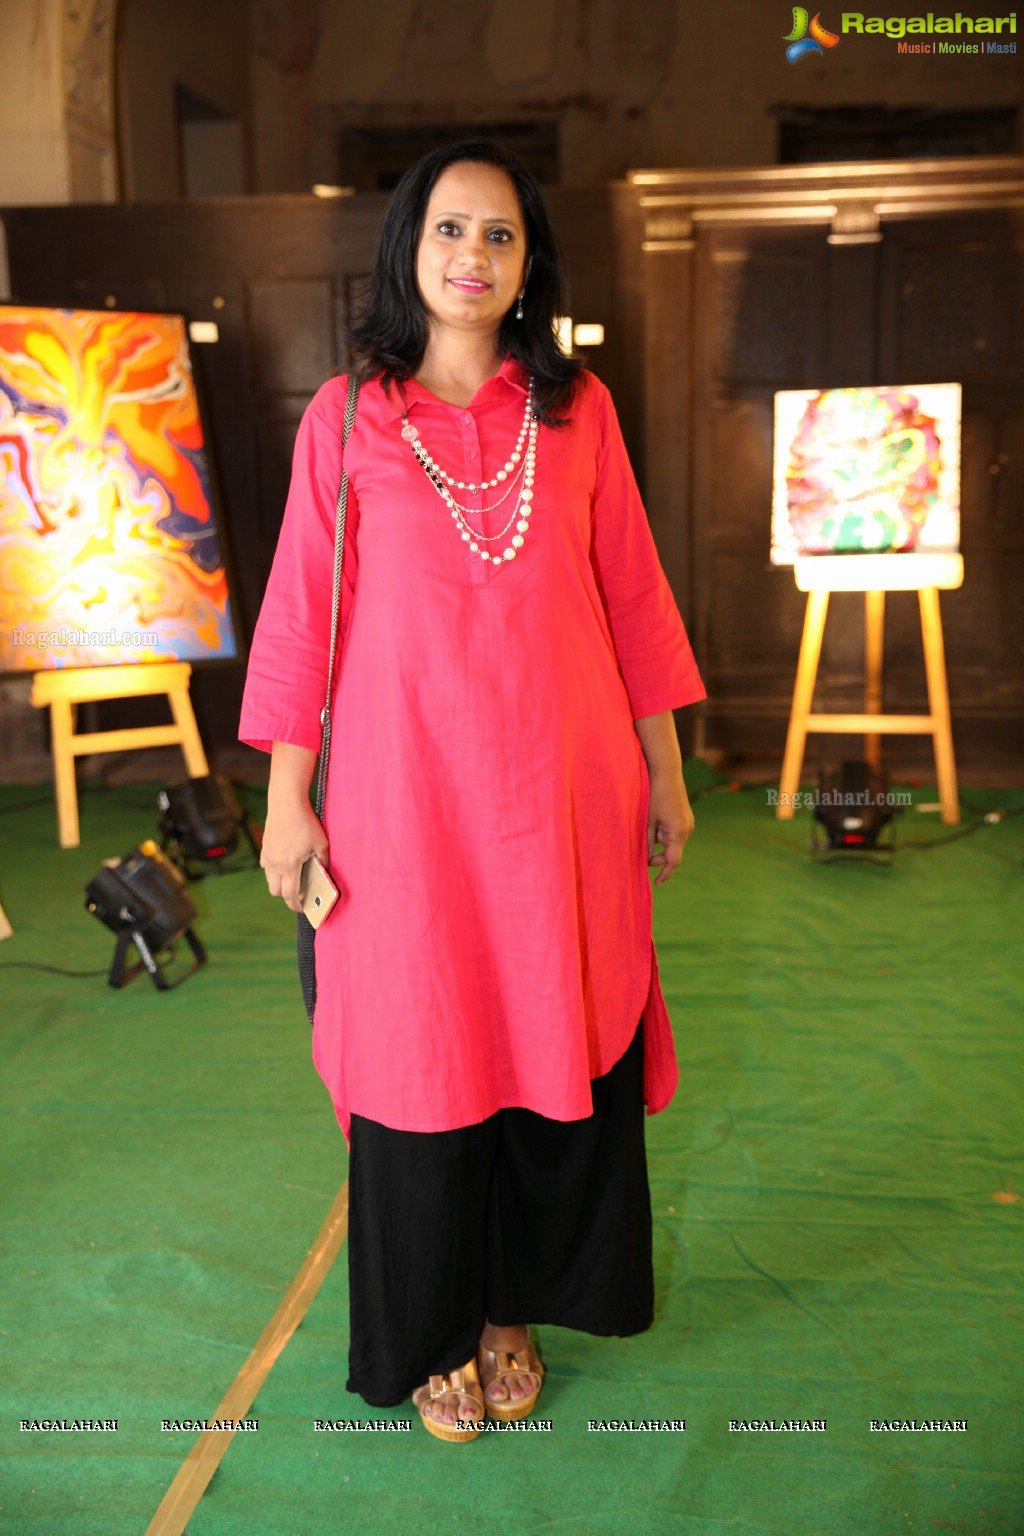 Art Performance and Exhibition of Paintings by Sravanti Juluri